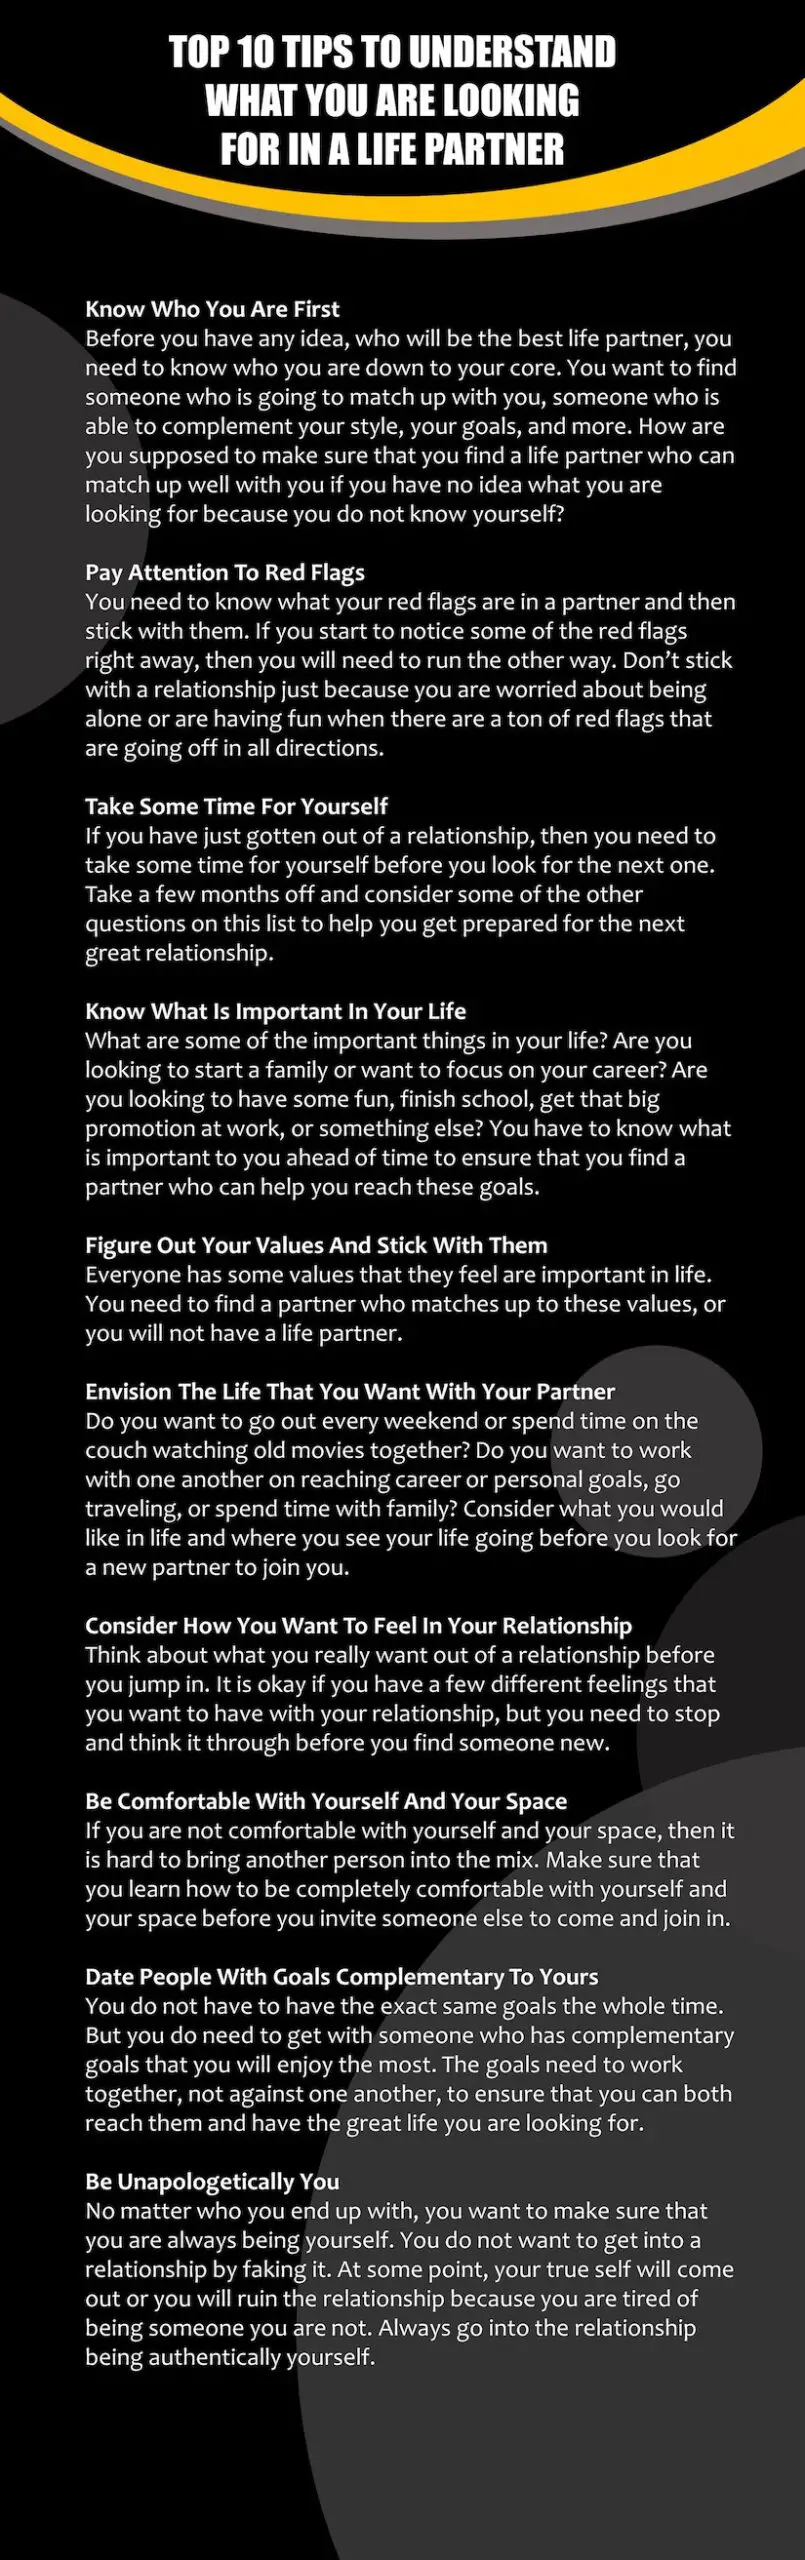 INFOGRAPHIC - Tips to understand what you are looking for in a life partner